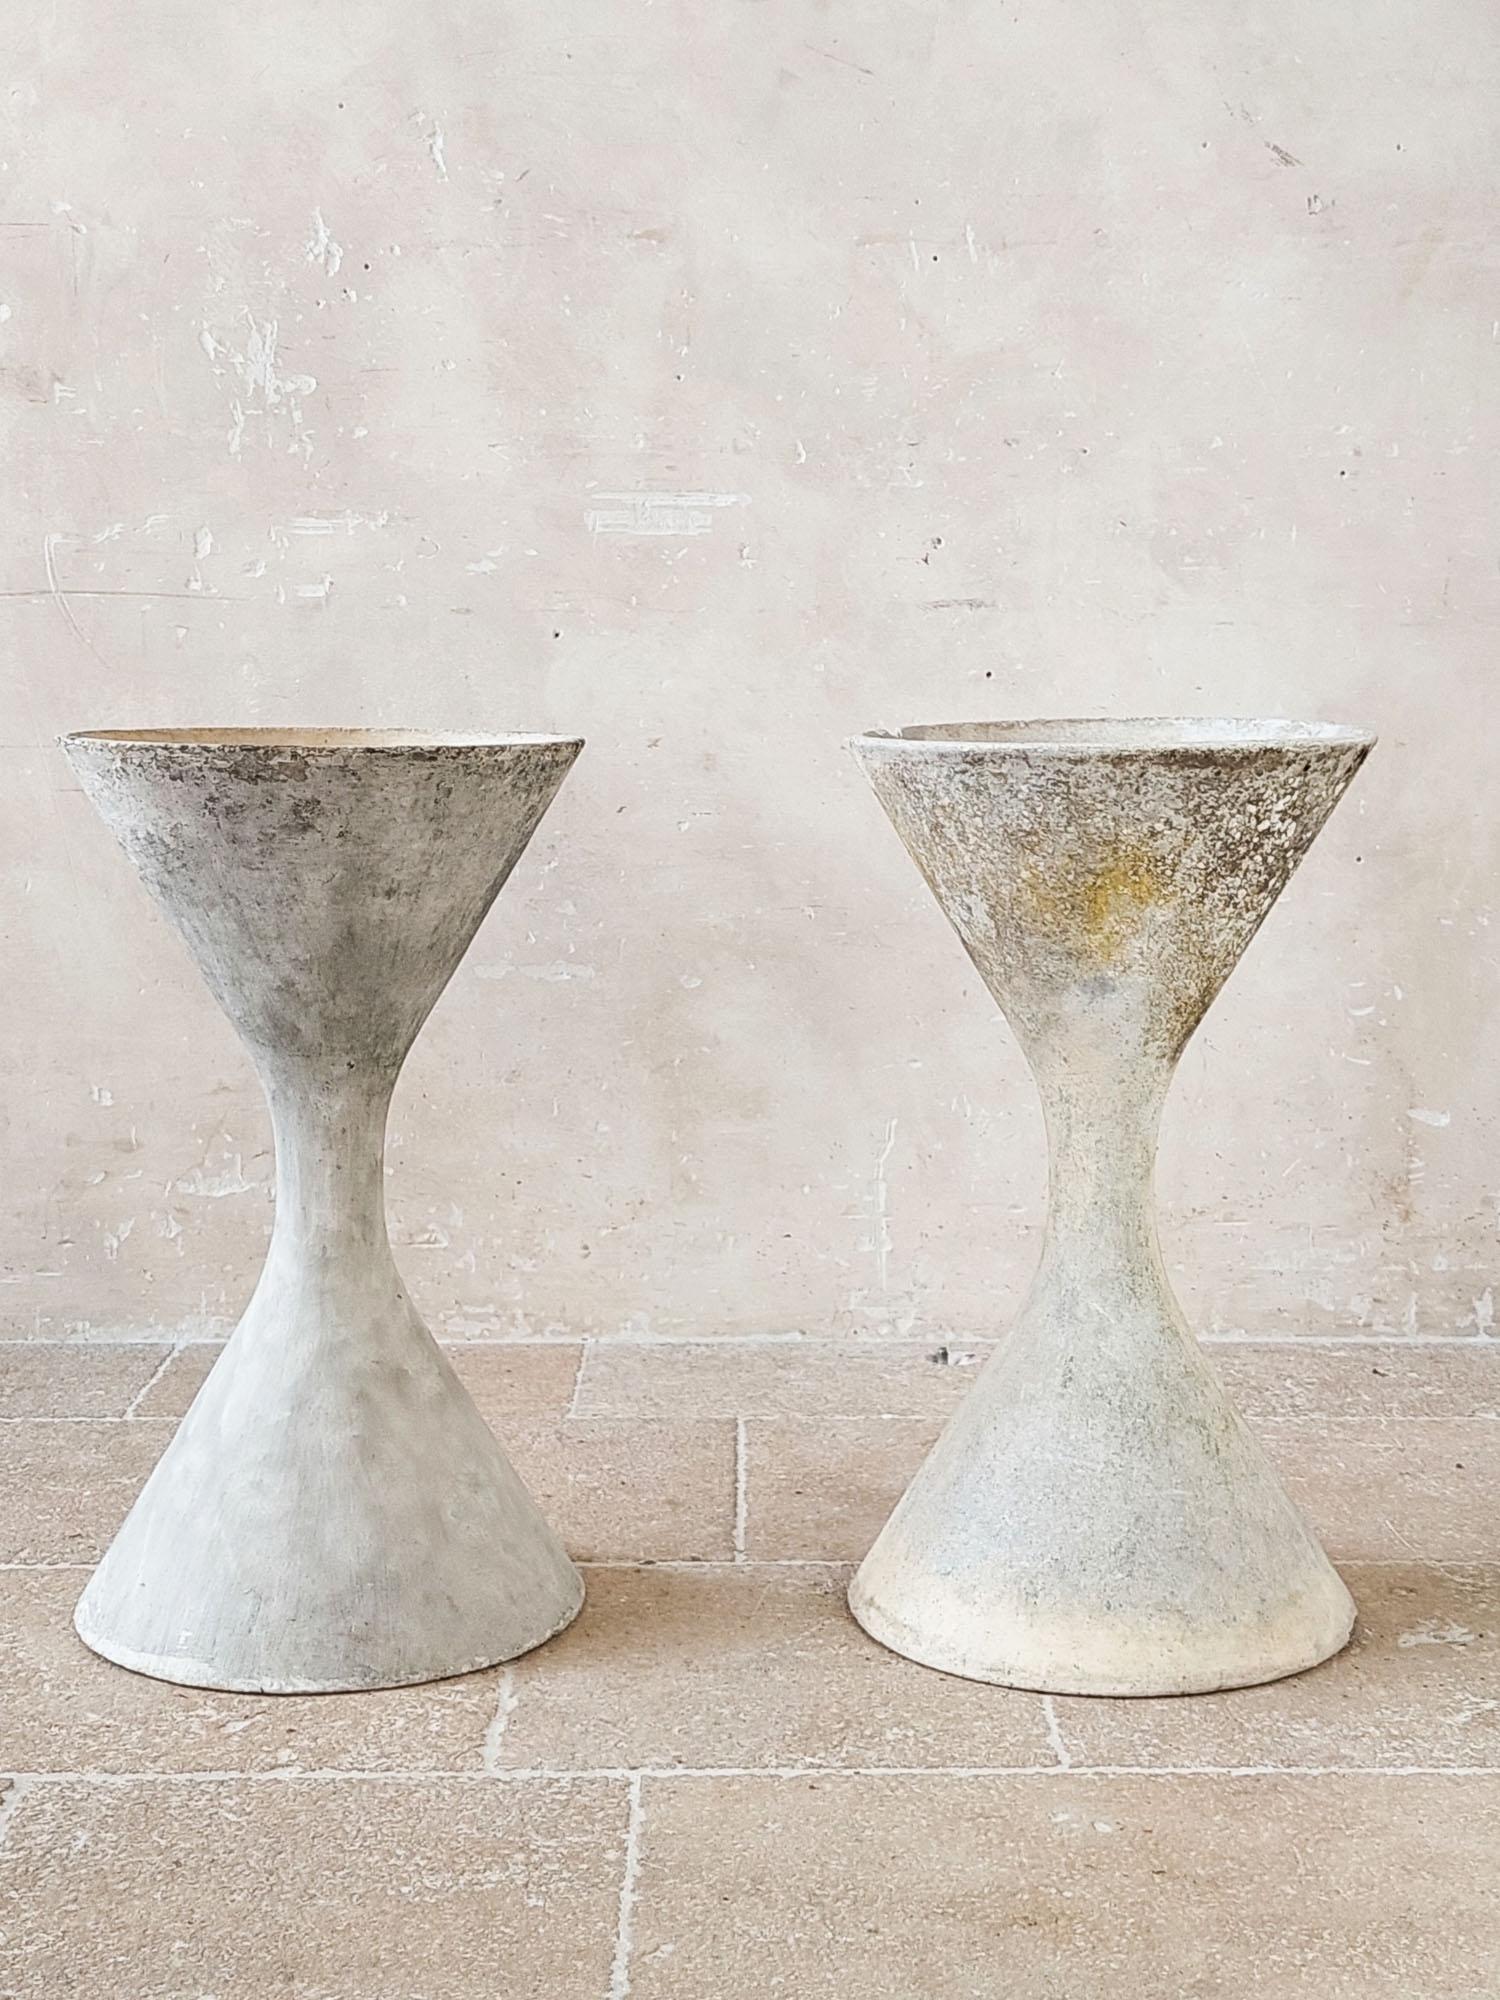 Price for the set!
Beautiful 'Diablo' concrete spindel planters by Swiss architect Willy Guhl. Manufactured by Eternit AG, who produced all of Guhl's designs. Made from fiber cement, the planters are lightweight and durable in all climates. These